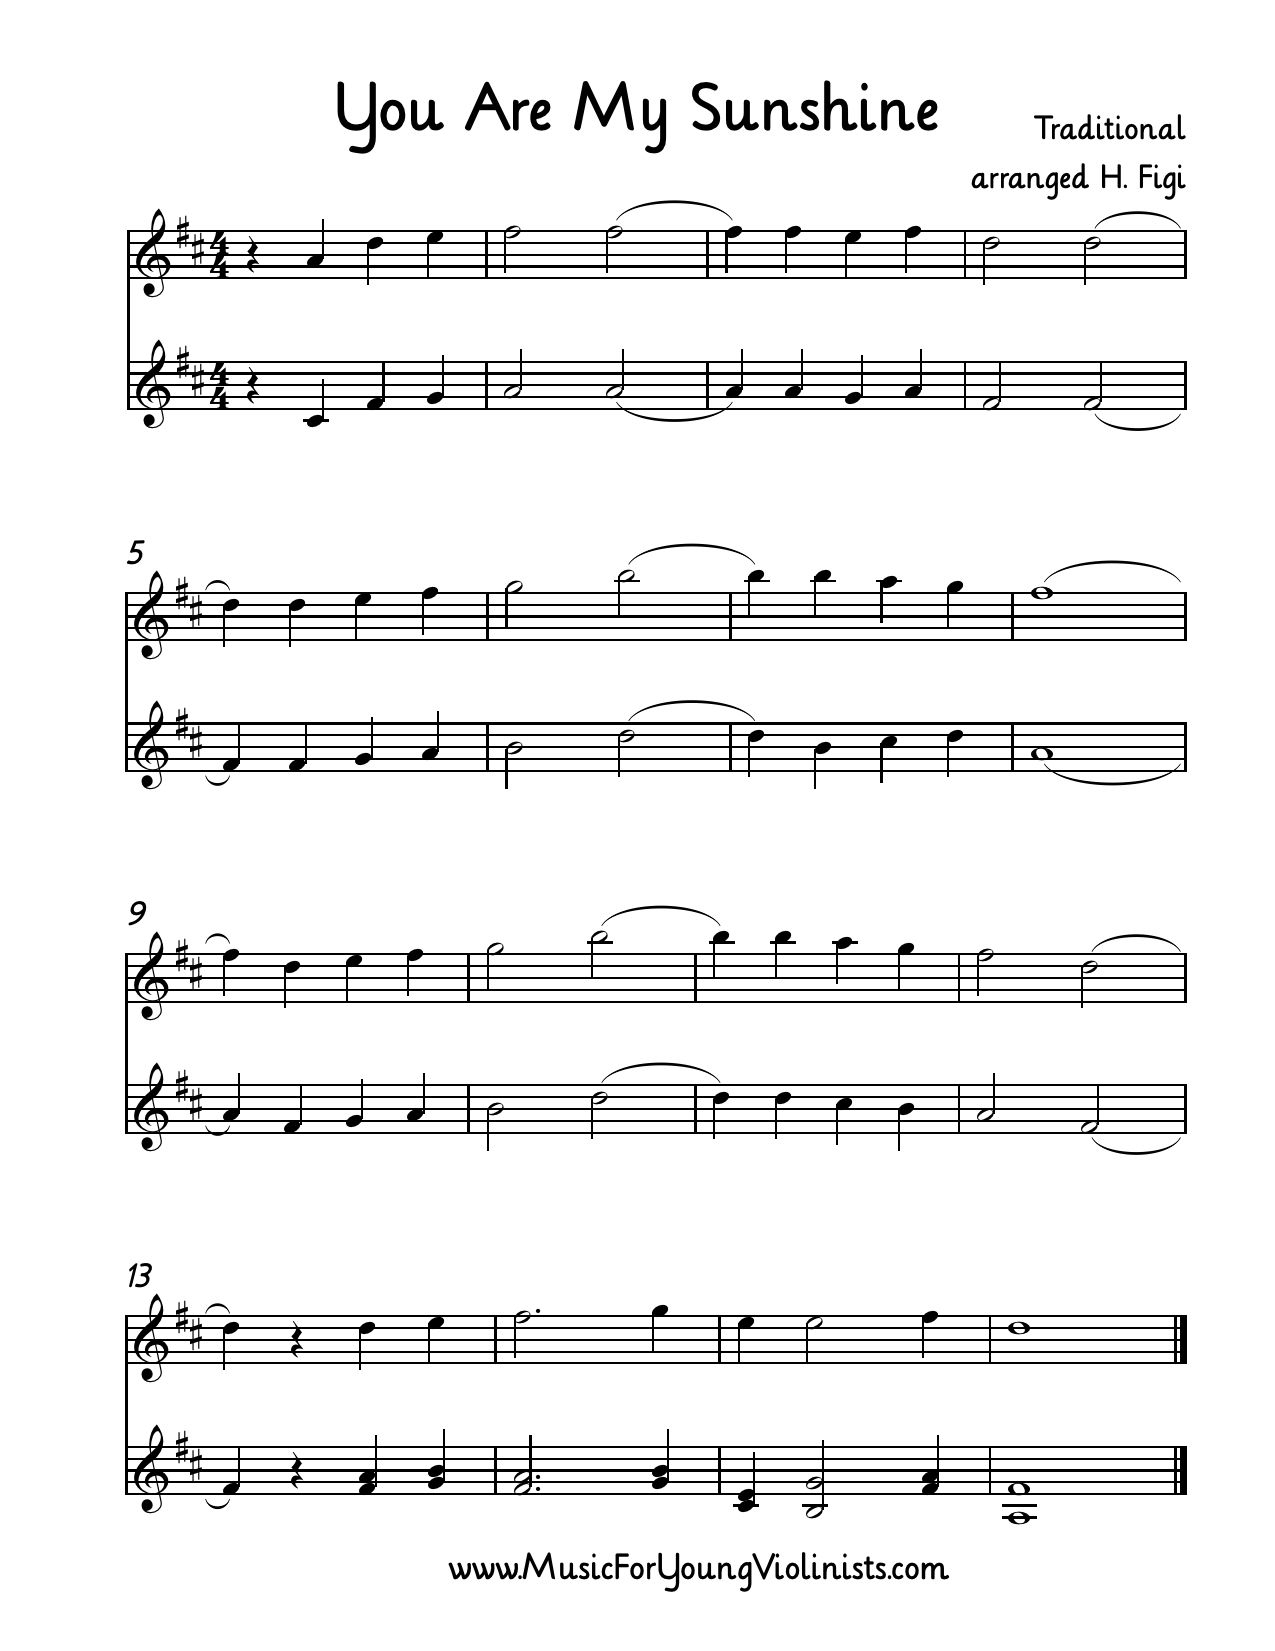 Violin Sheet Music: You Are My Sunshine Arranged For 2 Violins - Free Printable Piano Sheet Music For You Are My Sunshine